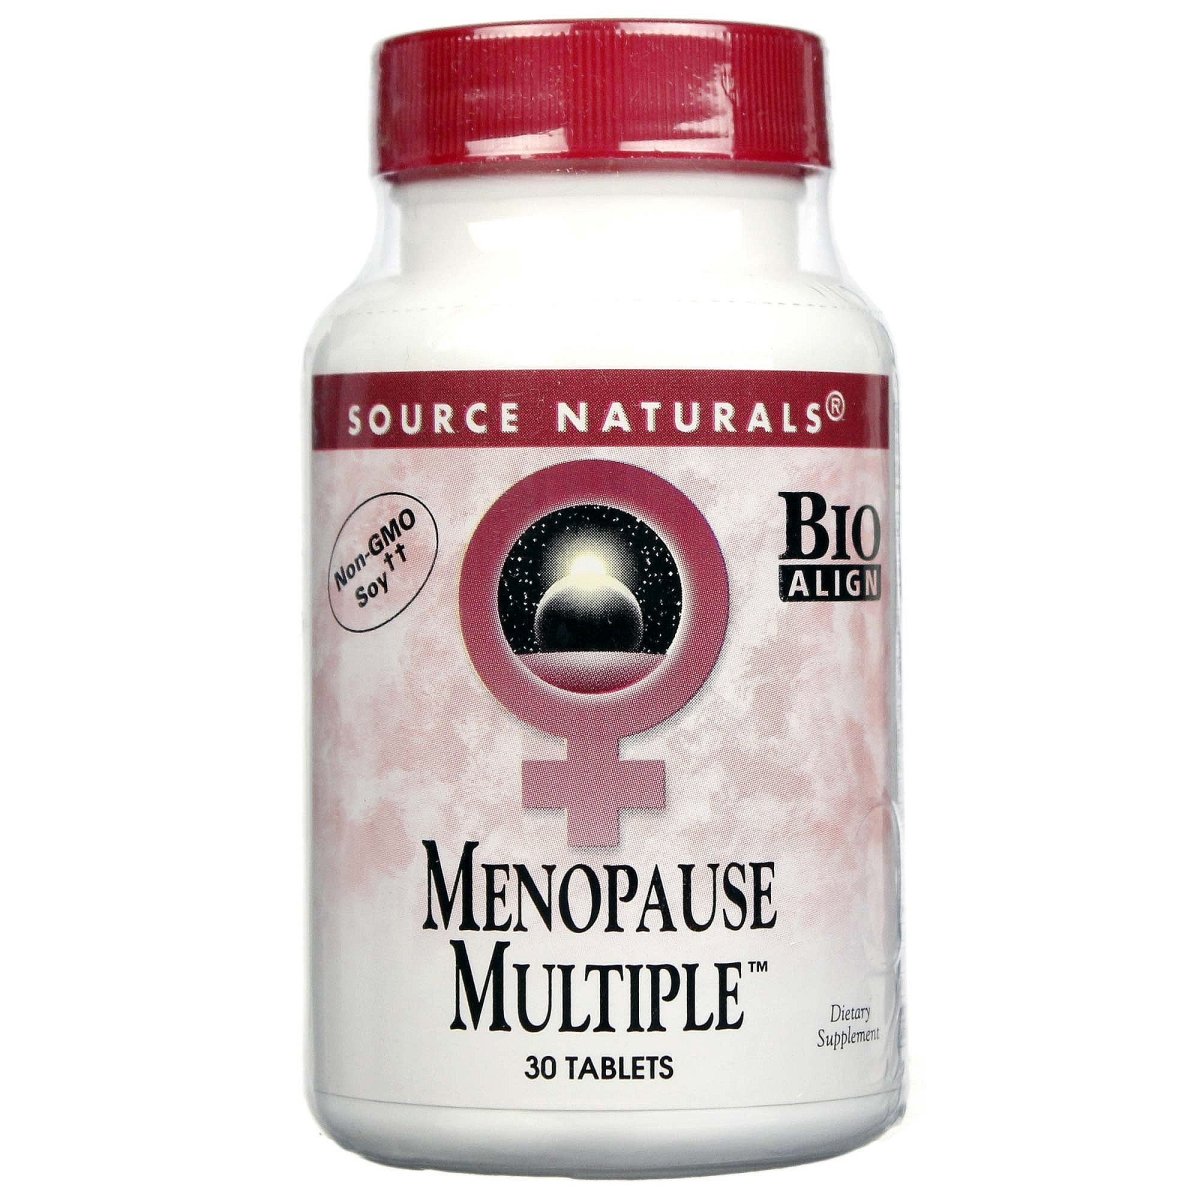 Source Naturals, Inc. Menopause Multiple 30 Tablets